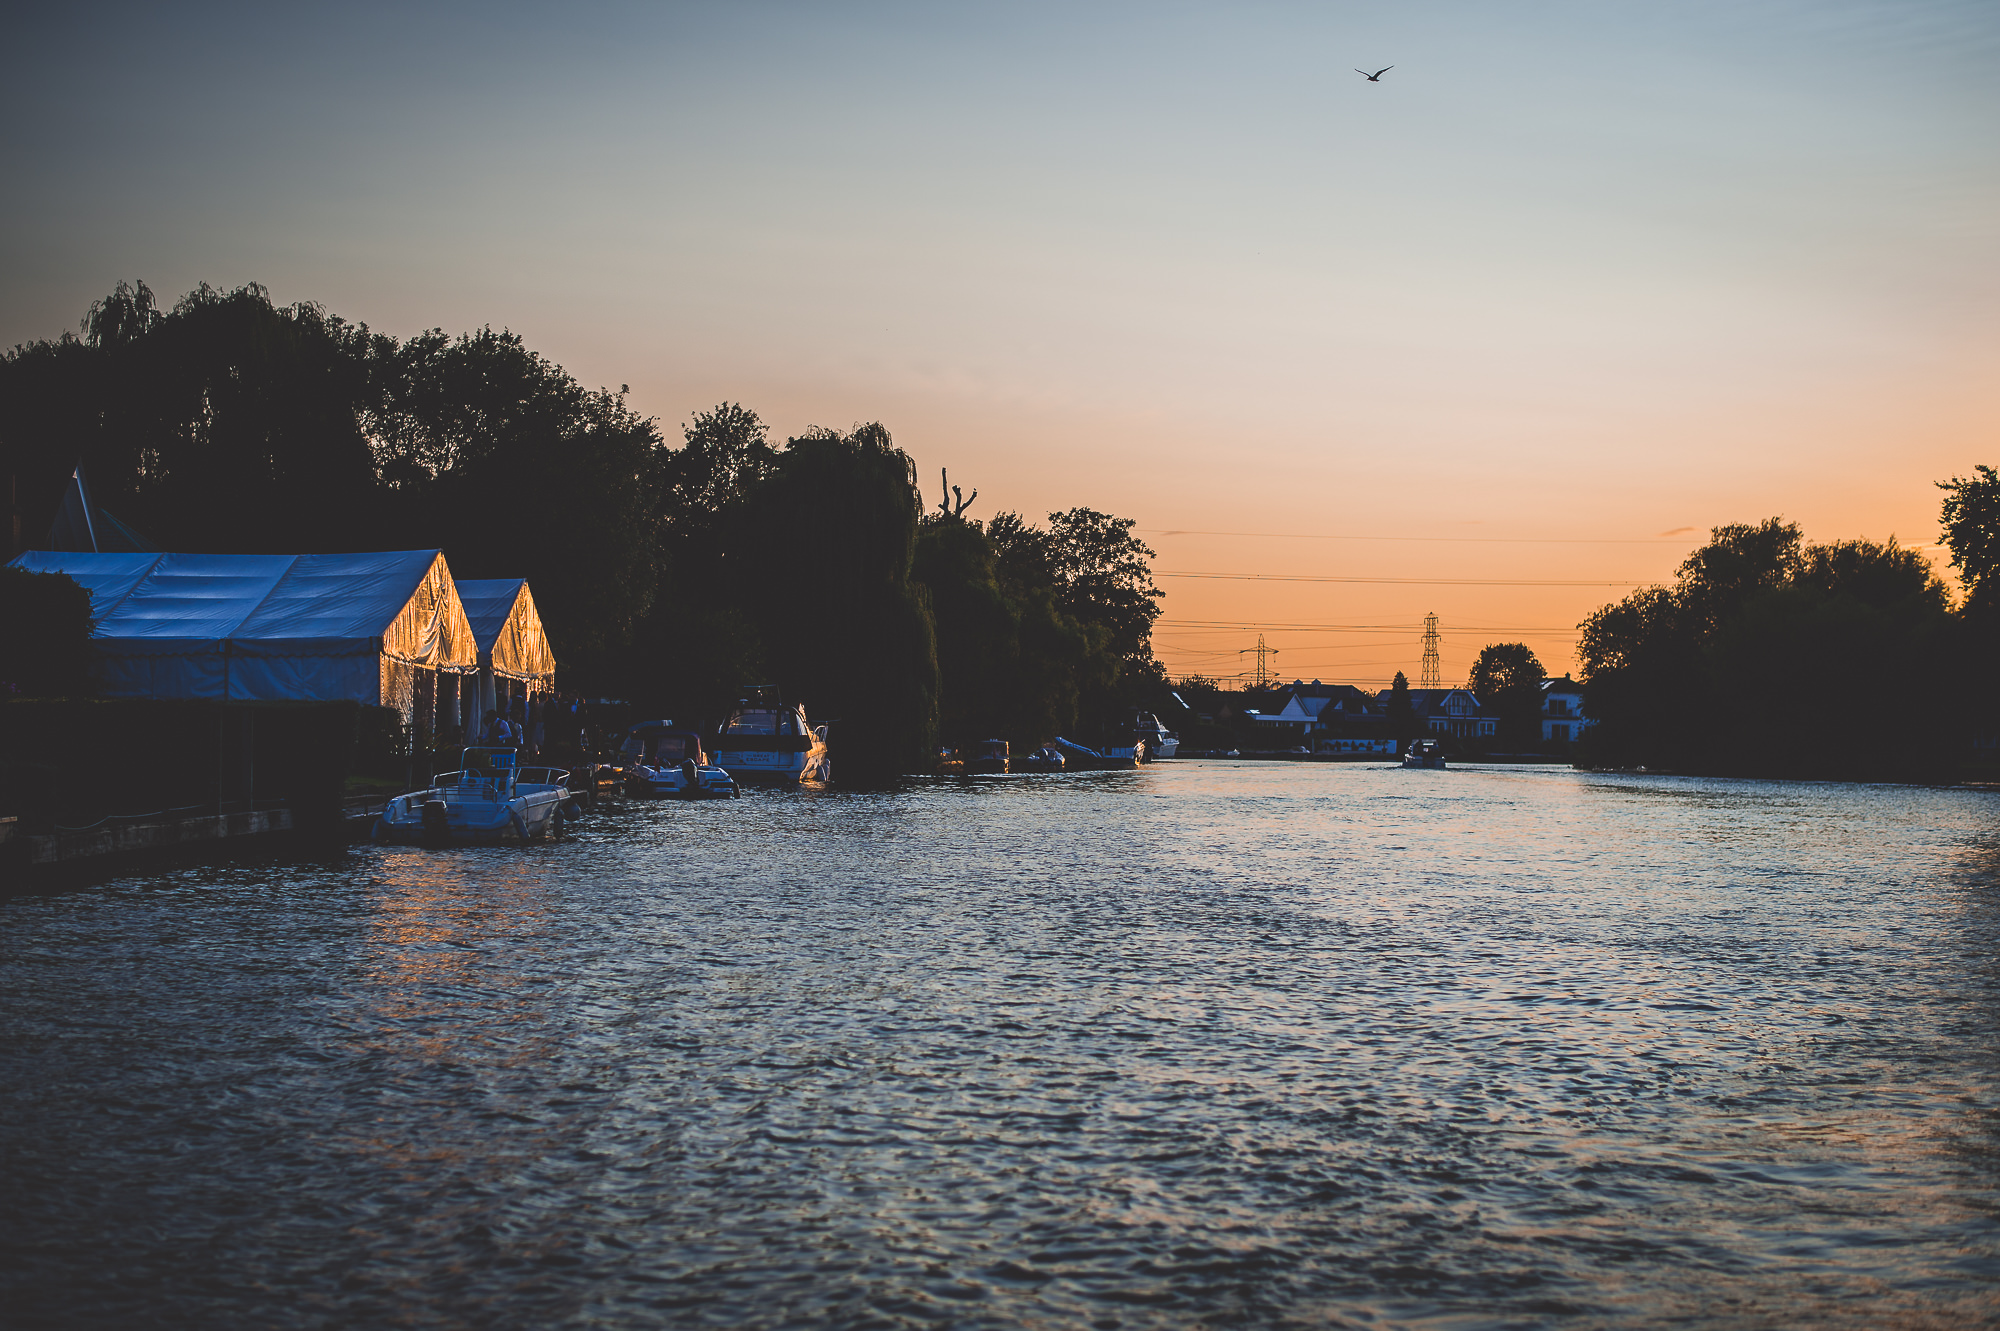 A romantic wedding photo captured by a skilled wedding photographer, featuring a river with boats on it illuminated by the vibrant sunset.